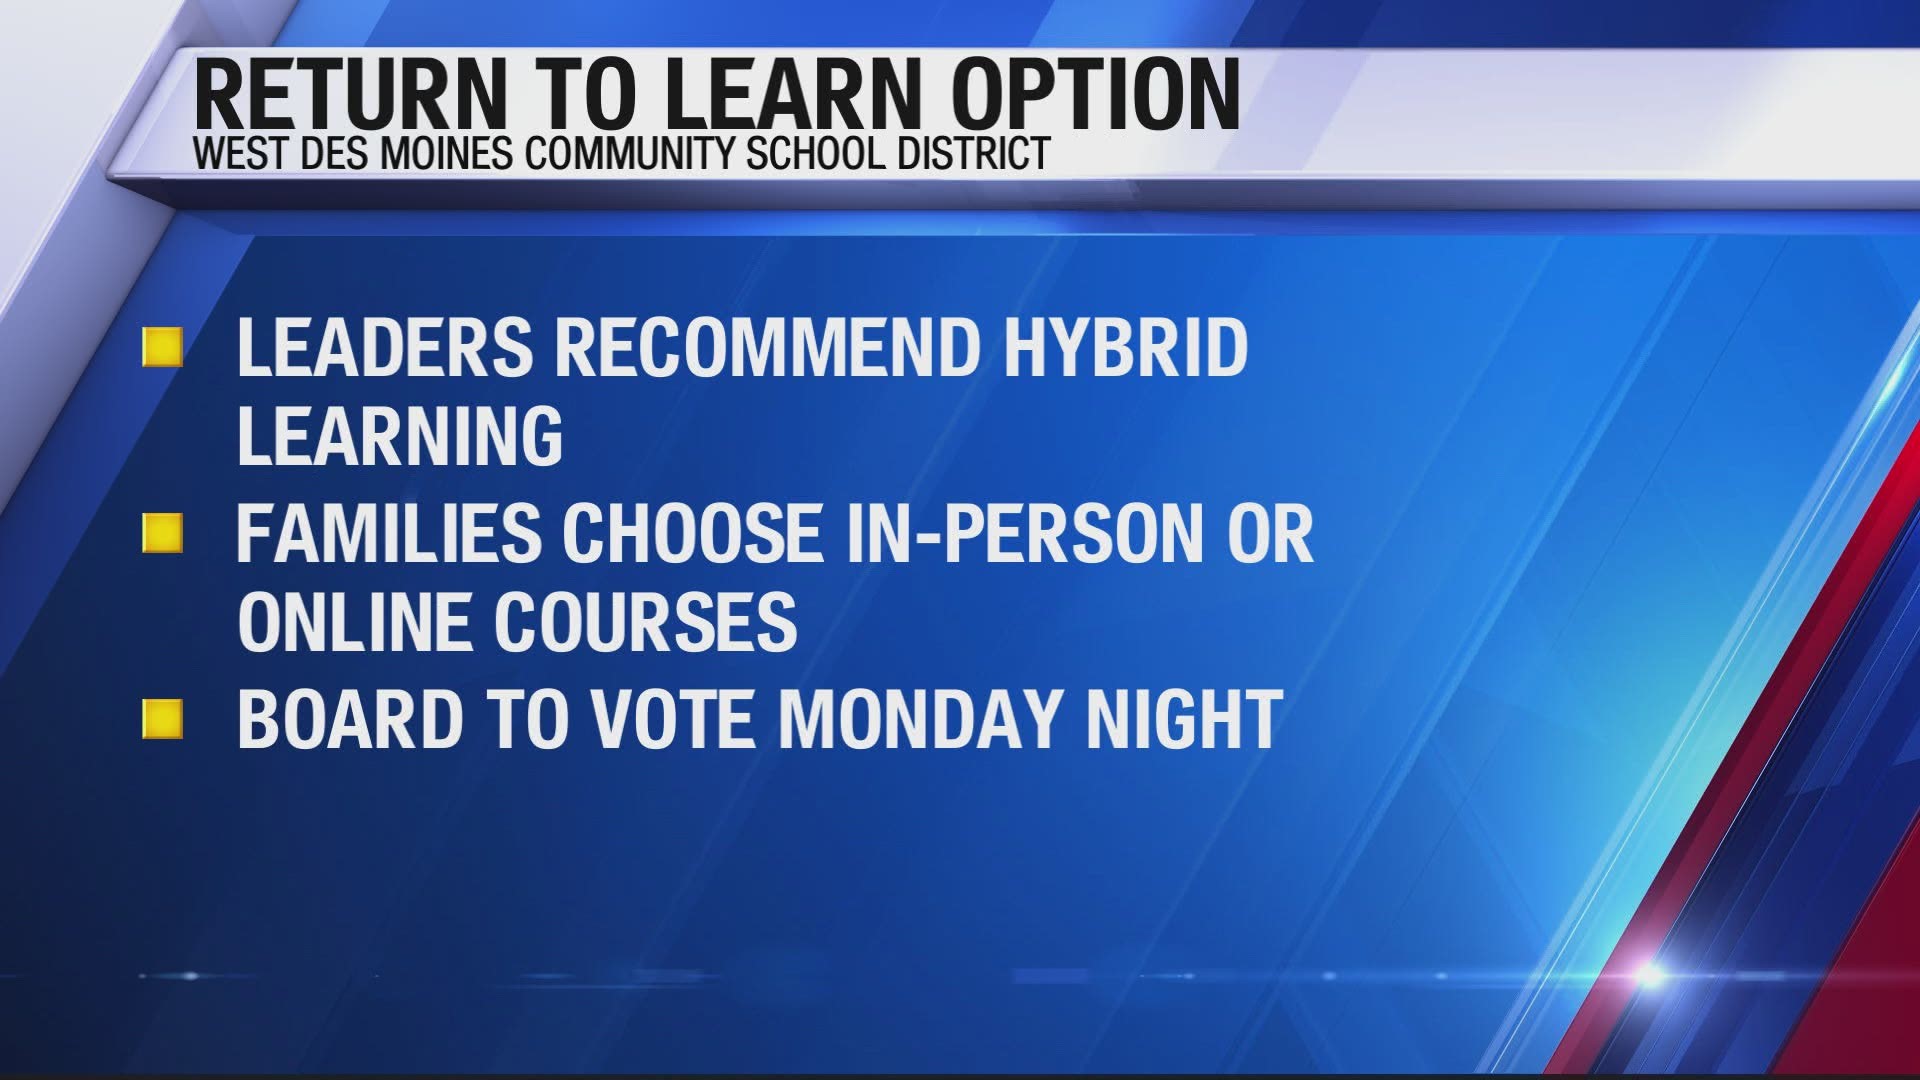 West Des Moines Community Schools leadership recommend hybrid learning model. The school board will meet Monday to consider the Return to Learn recommendation.